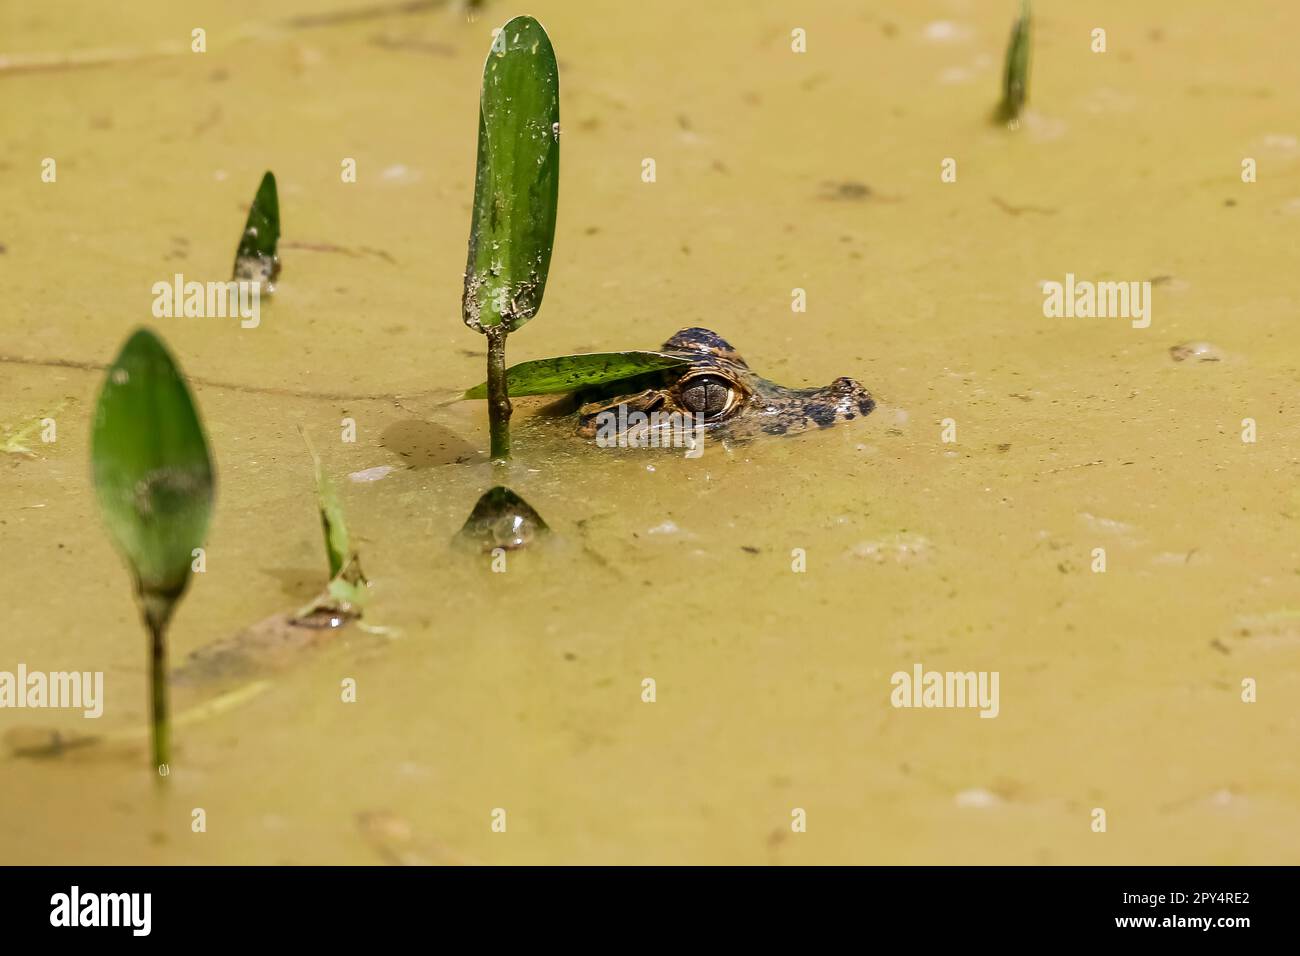 Head of a small Yacare caiman on surface of a muddy river with some green plants, Pantanal Wetlands, Mato Grosso, Brazil Stock Photo